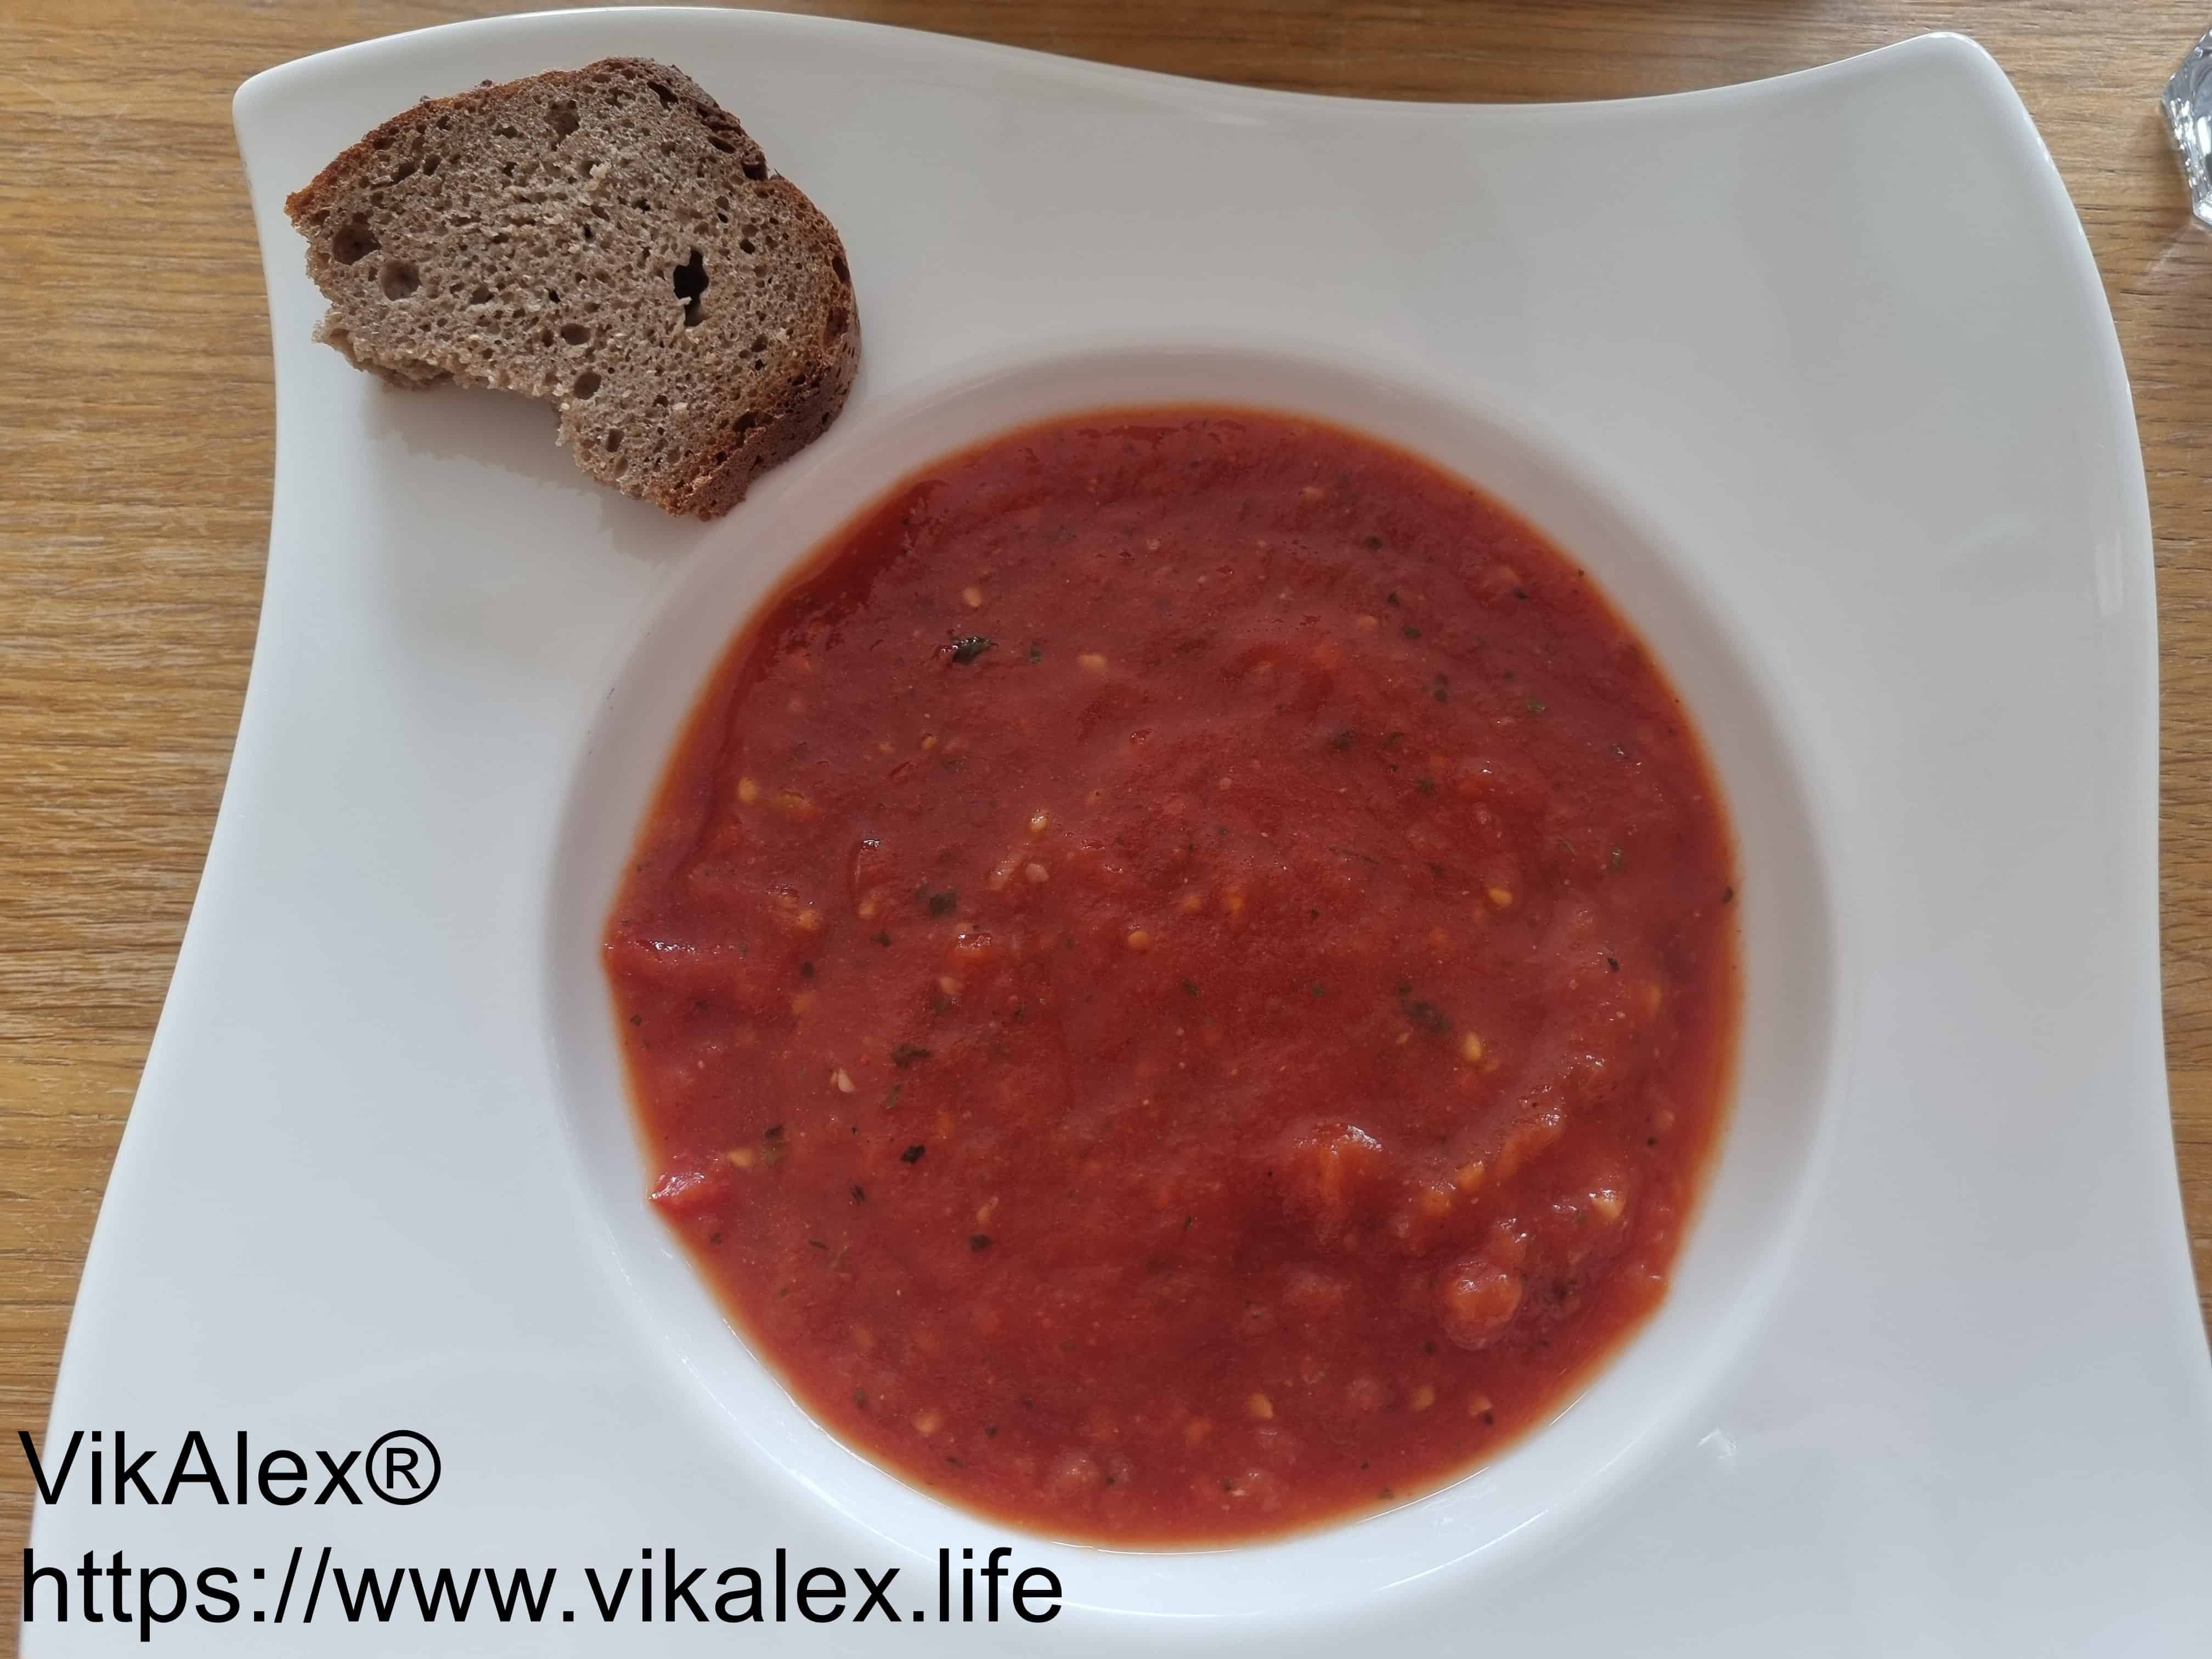 Tomatensuppe